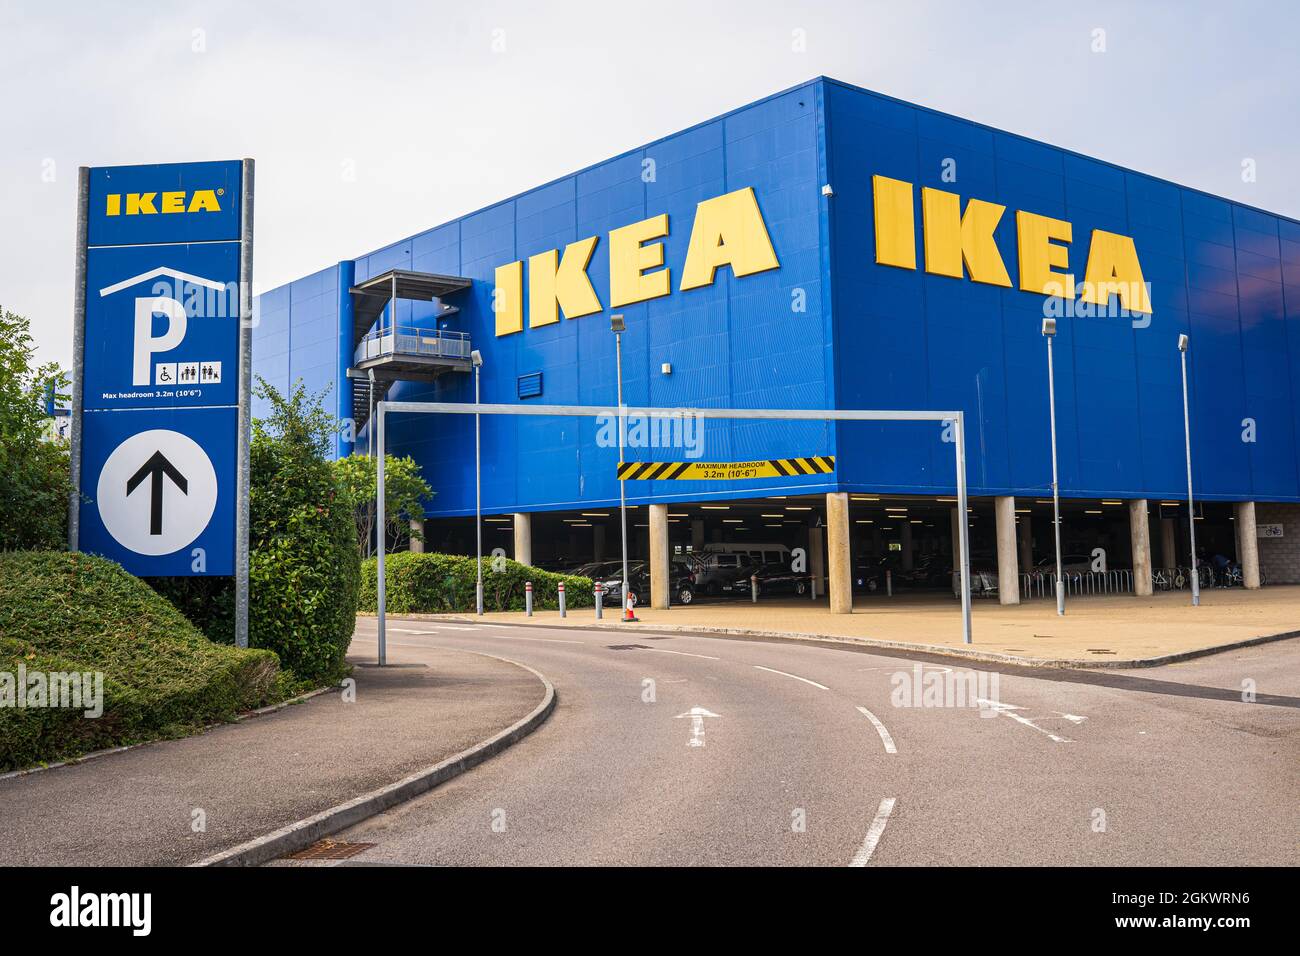 IKEA home furnishings store building exterior, blue facade with yellow sign logo. Cardiff, Wales, the United Kingdom - September 13, 2021 Stock Photo